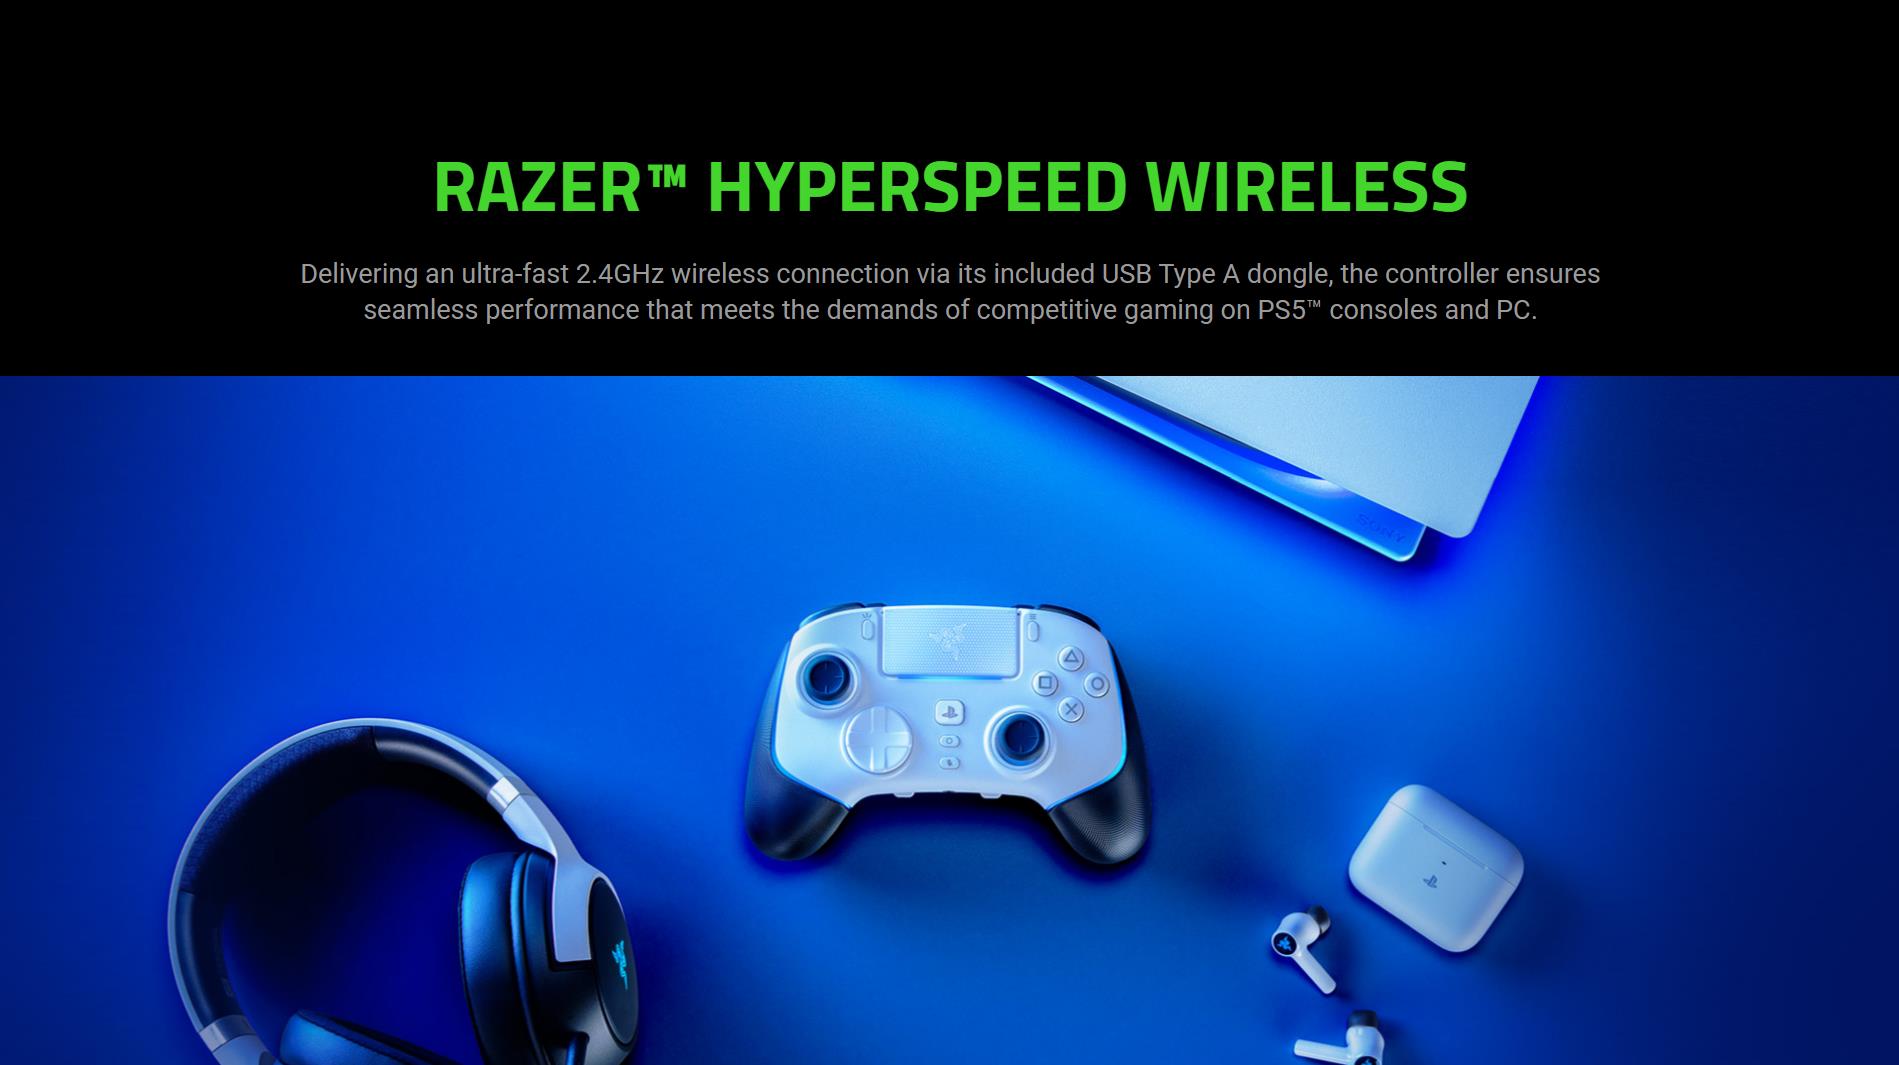 A large marketing image providing additional information about the product Razer Wolverine V2 Pro - Wireless Gaming Controller (Black) - Additional alt info not provided